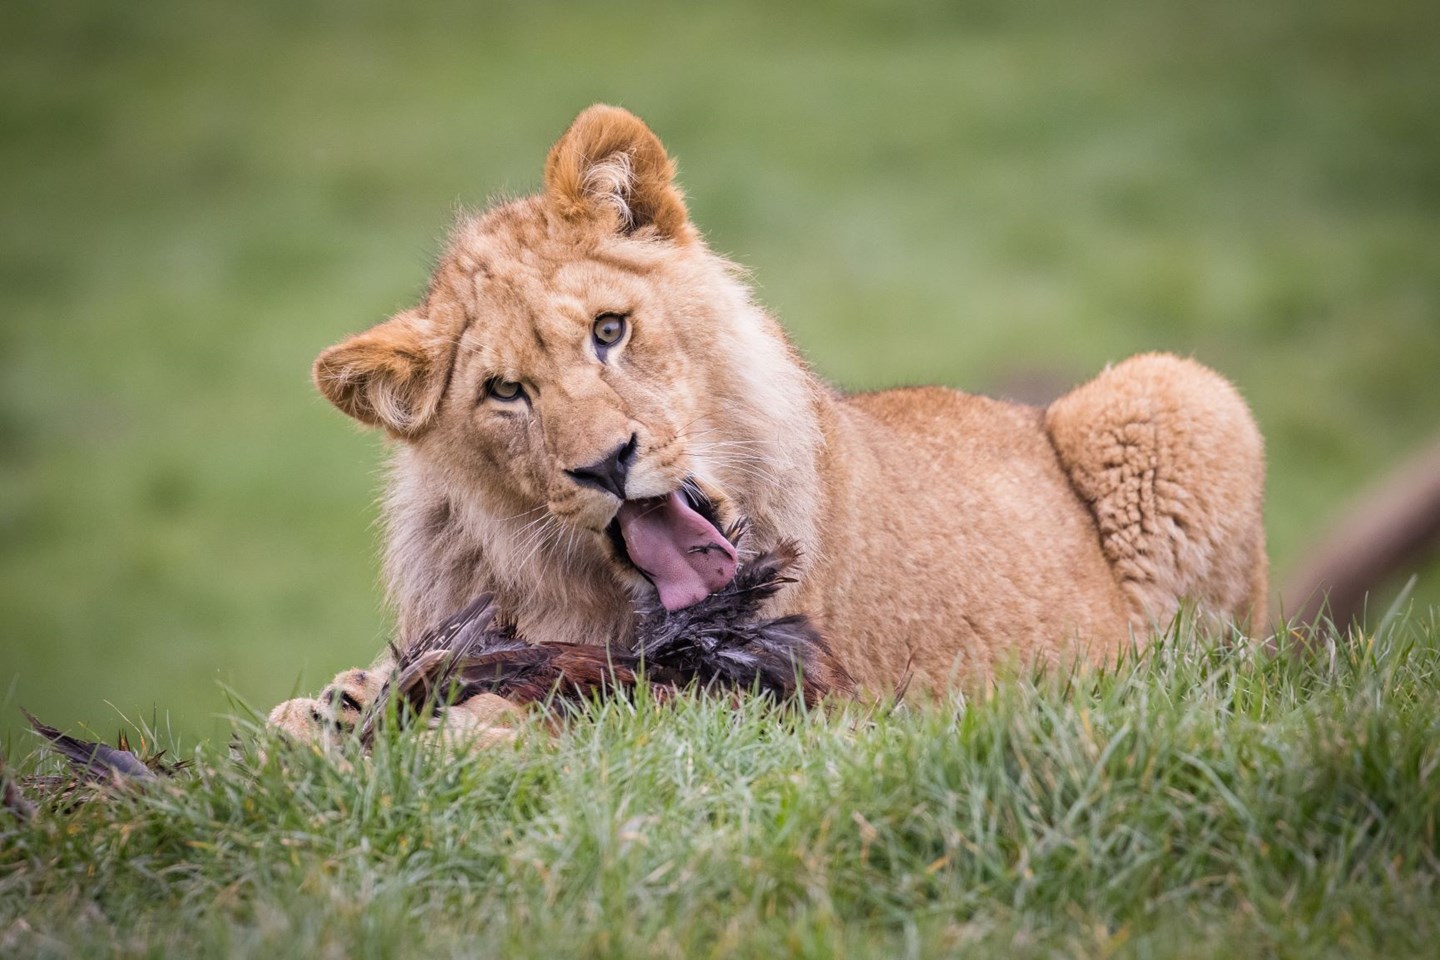 Young lion licks bird he is eating in grassy road safari 